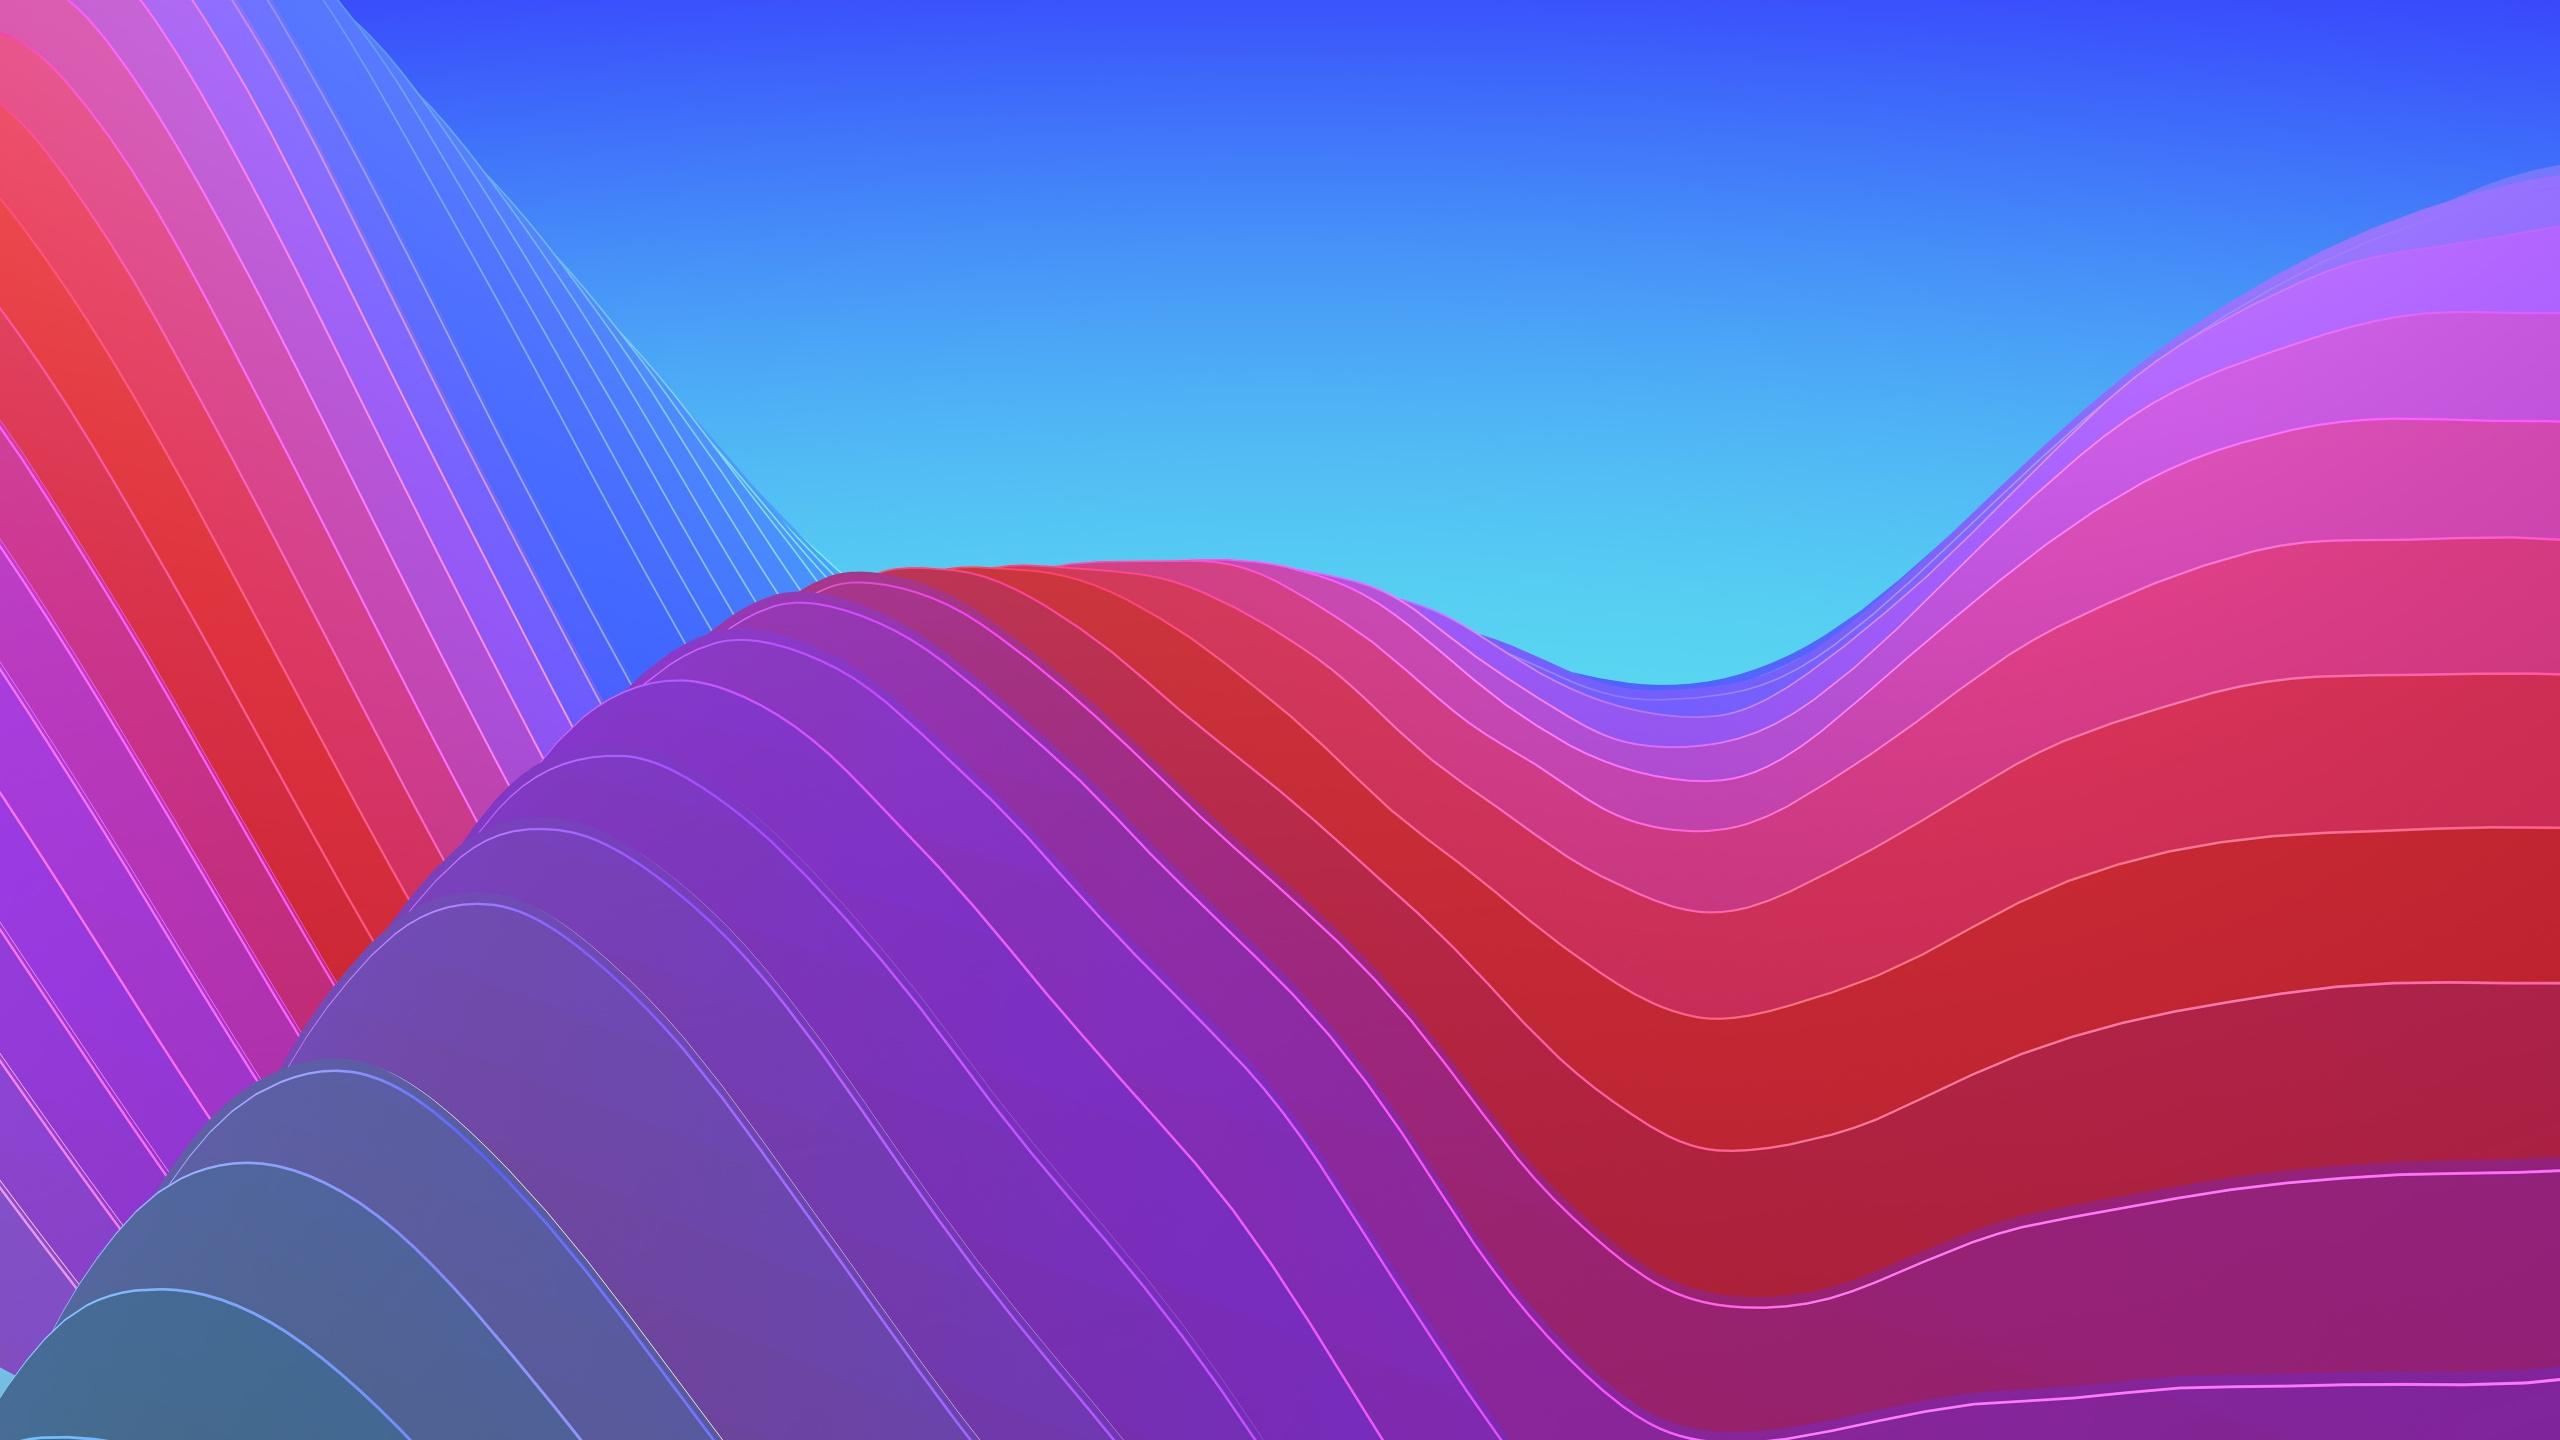 Download 2560x1440 wallpaper waves, abstract, gradient, ios 11